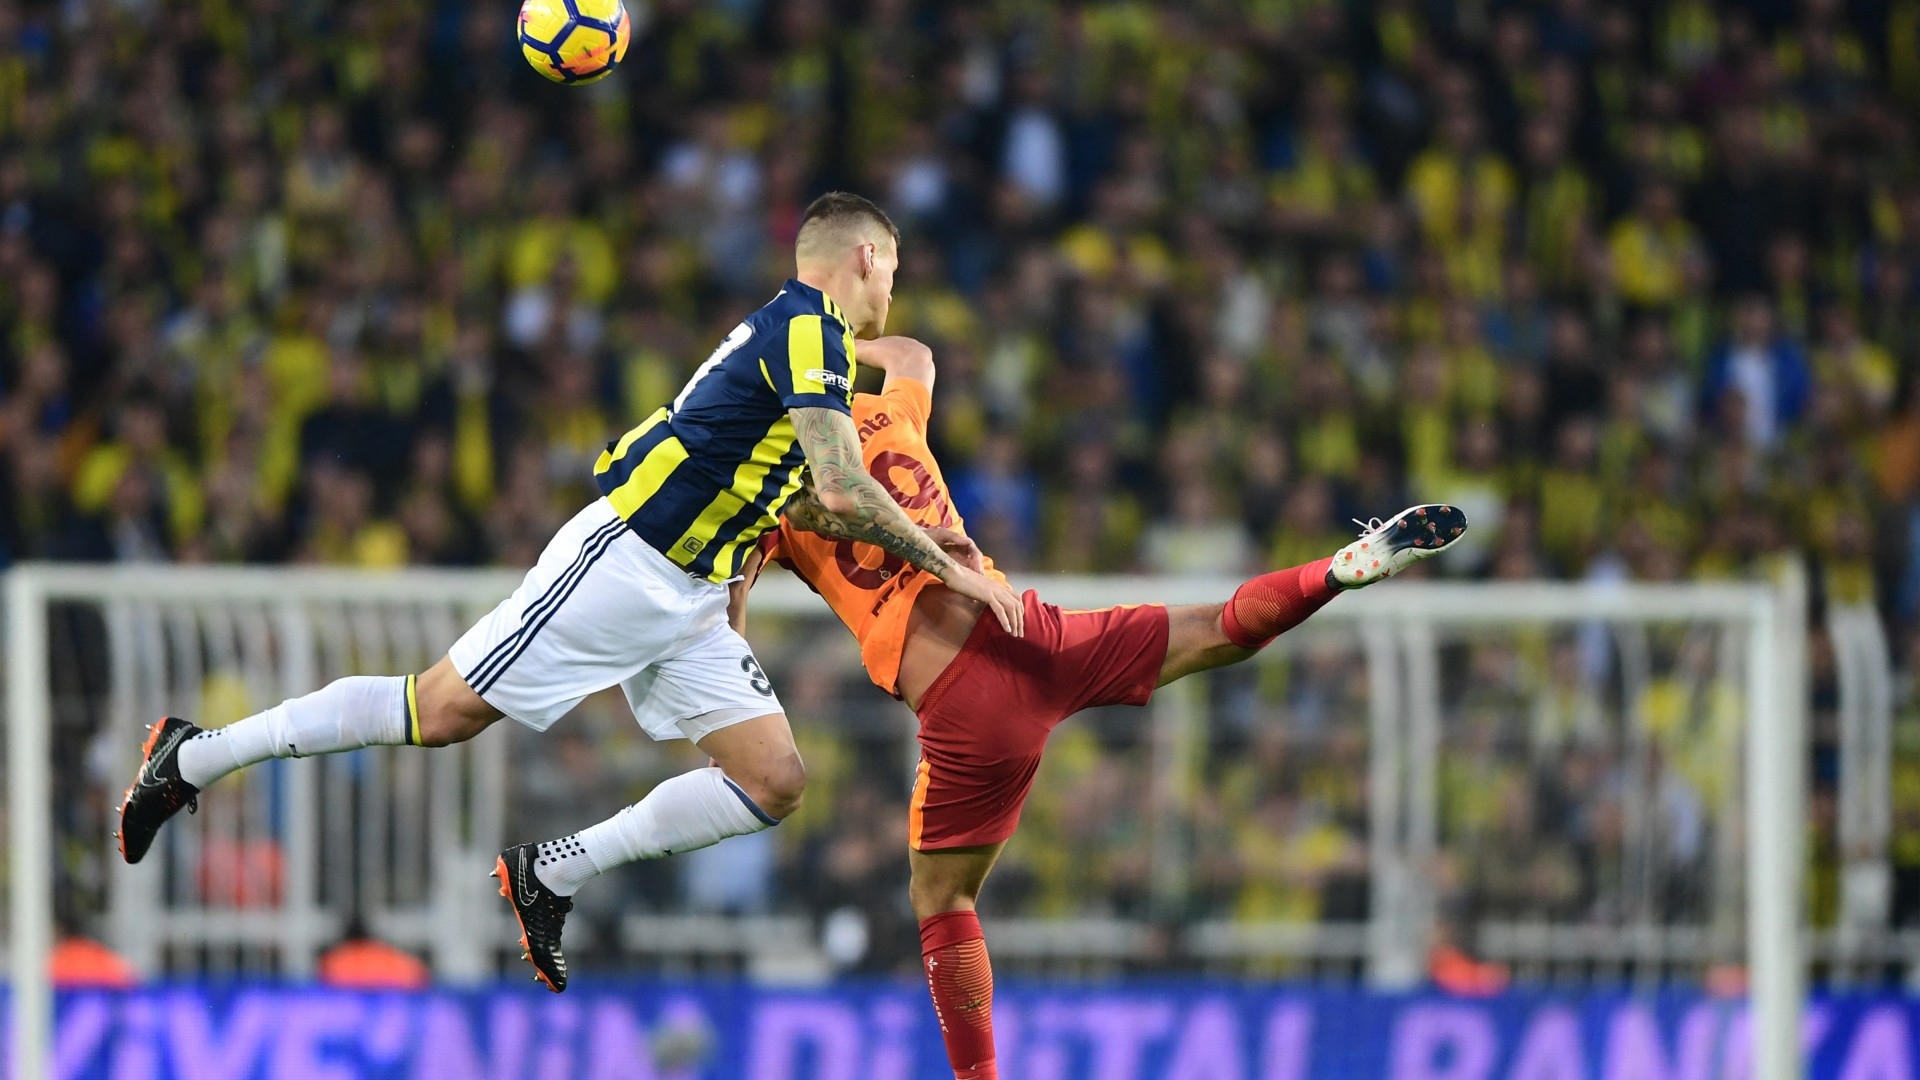 A picture taken during a match between Fenerbahce and Galatasaray on 17 March 2018 at Fenerbahce Ulker stadium in Istanbul (Ozan Kose/AFP)